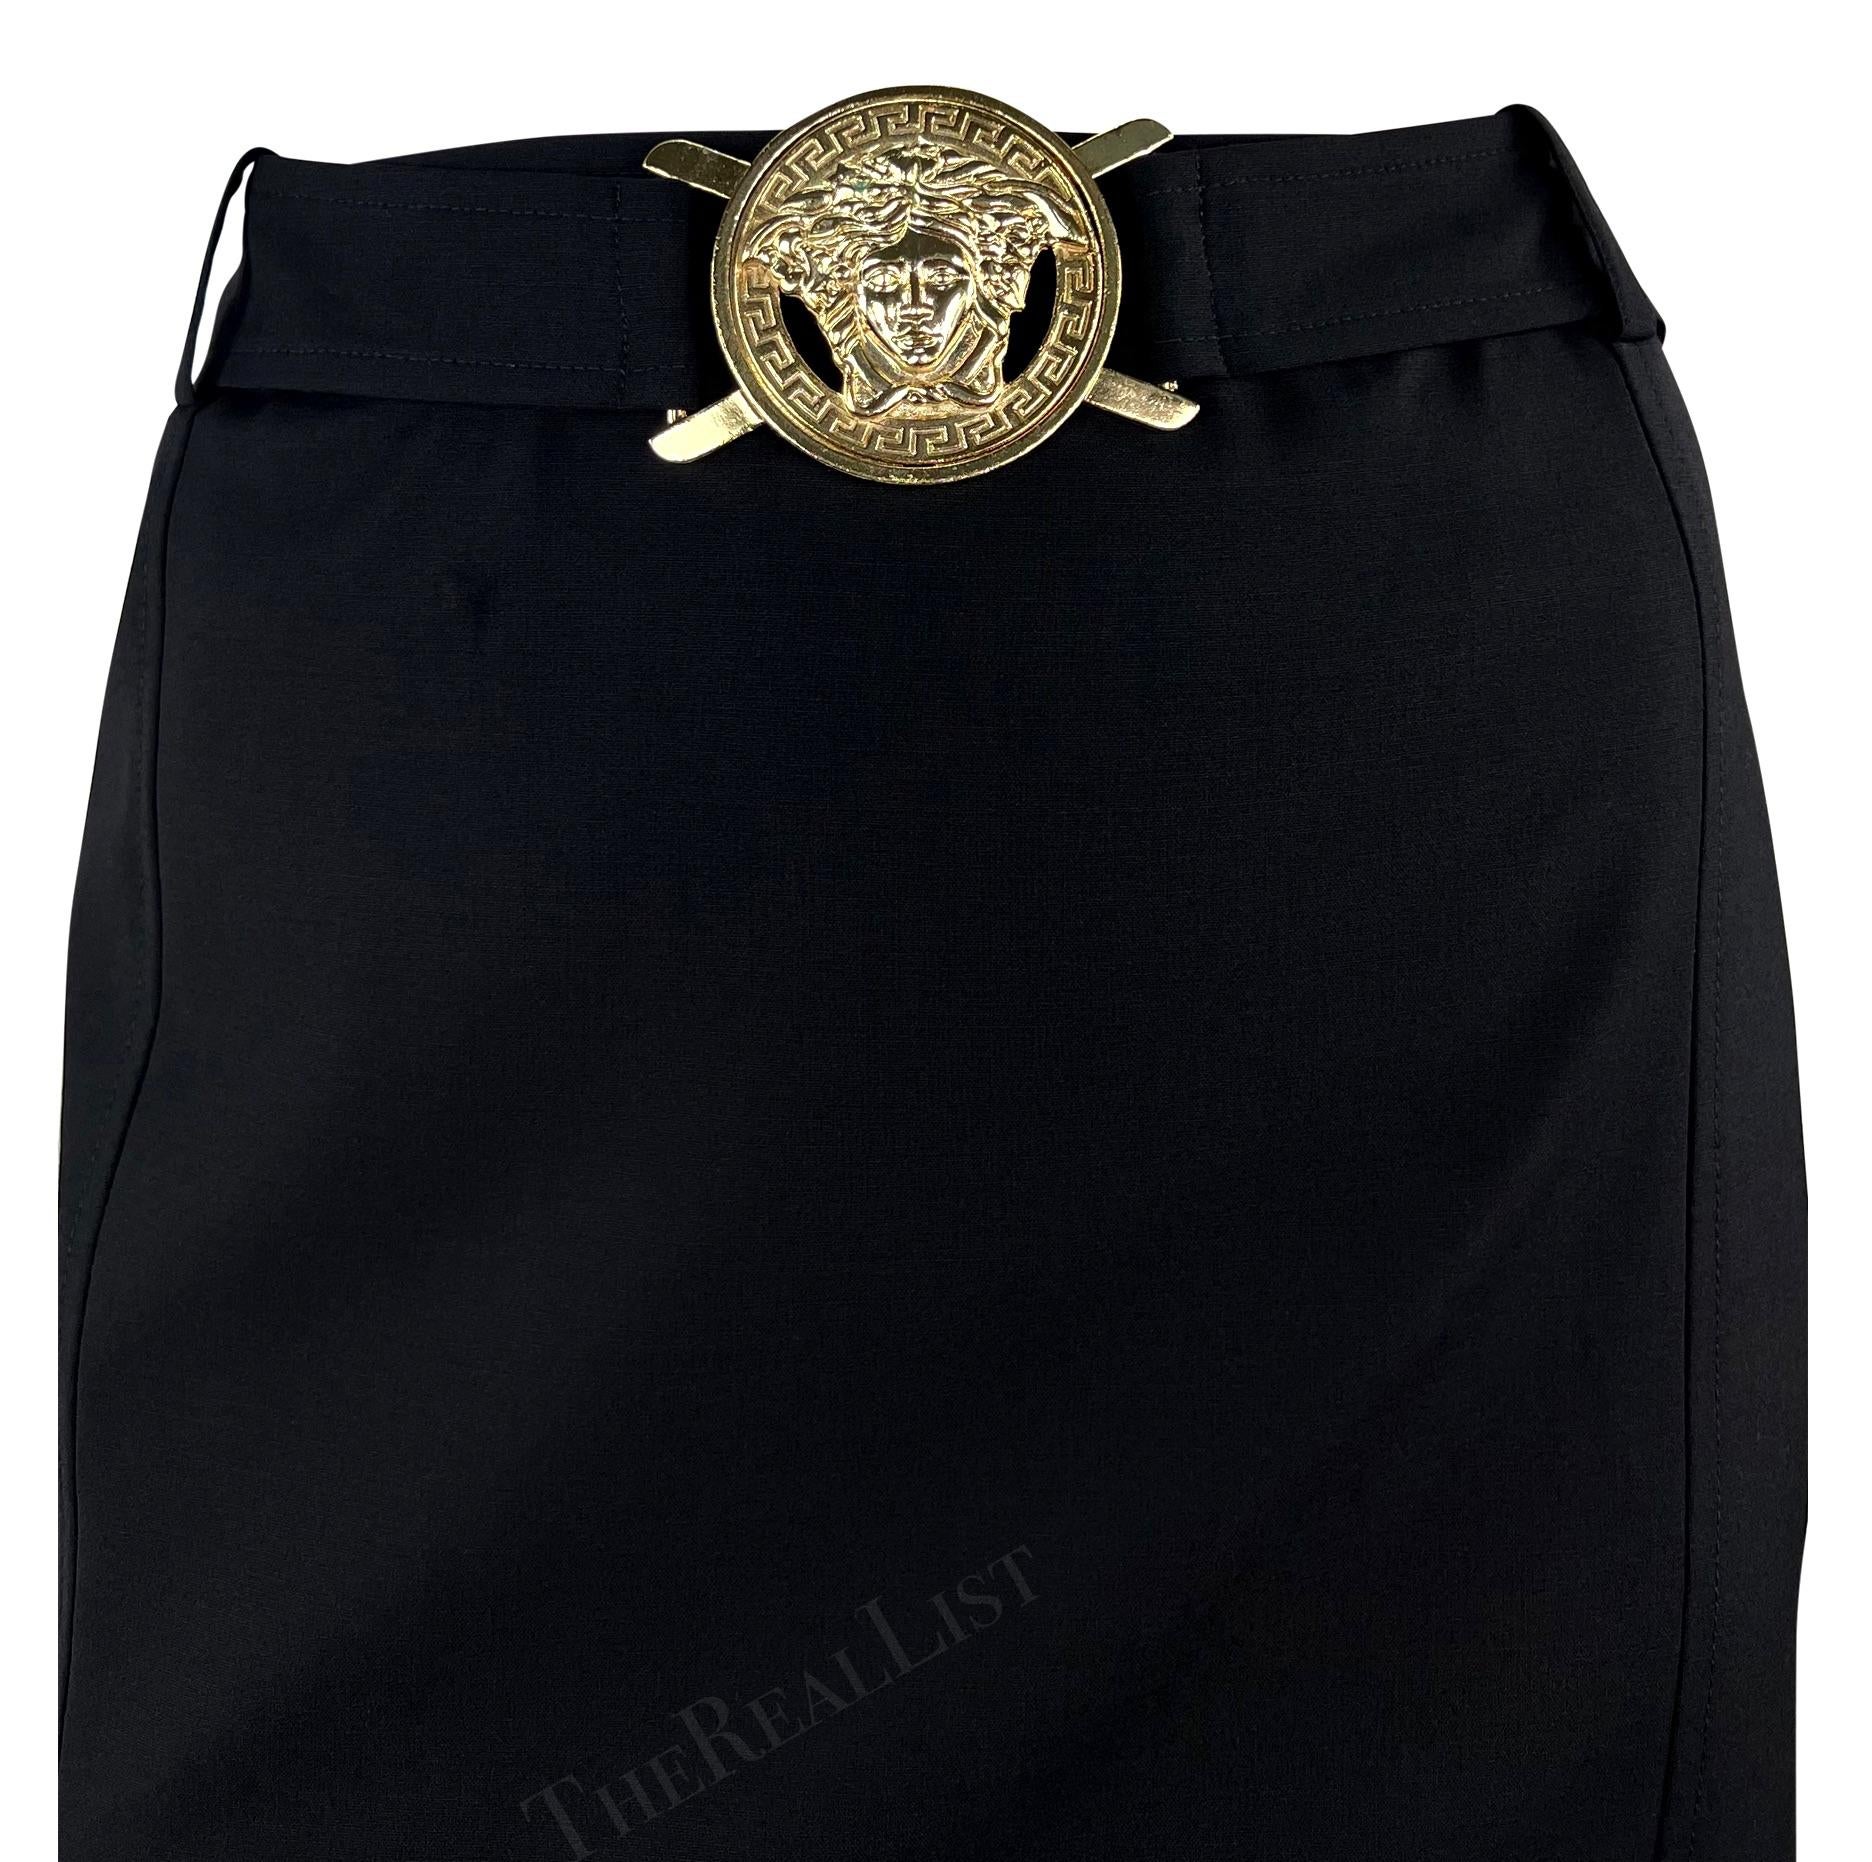 Presenting a chic black high-waisted skirt by Versace, designed by Donatella Versace from the Spring/Summer 2005 collection. This knee-length skirt showcases a sewn-in waist belt adorned with a prominent Versace Medusa buckle at the